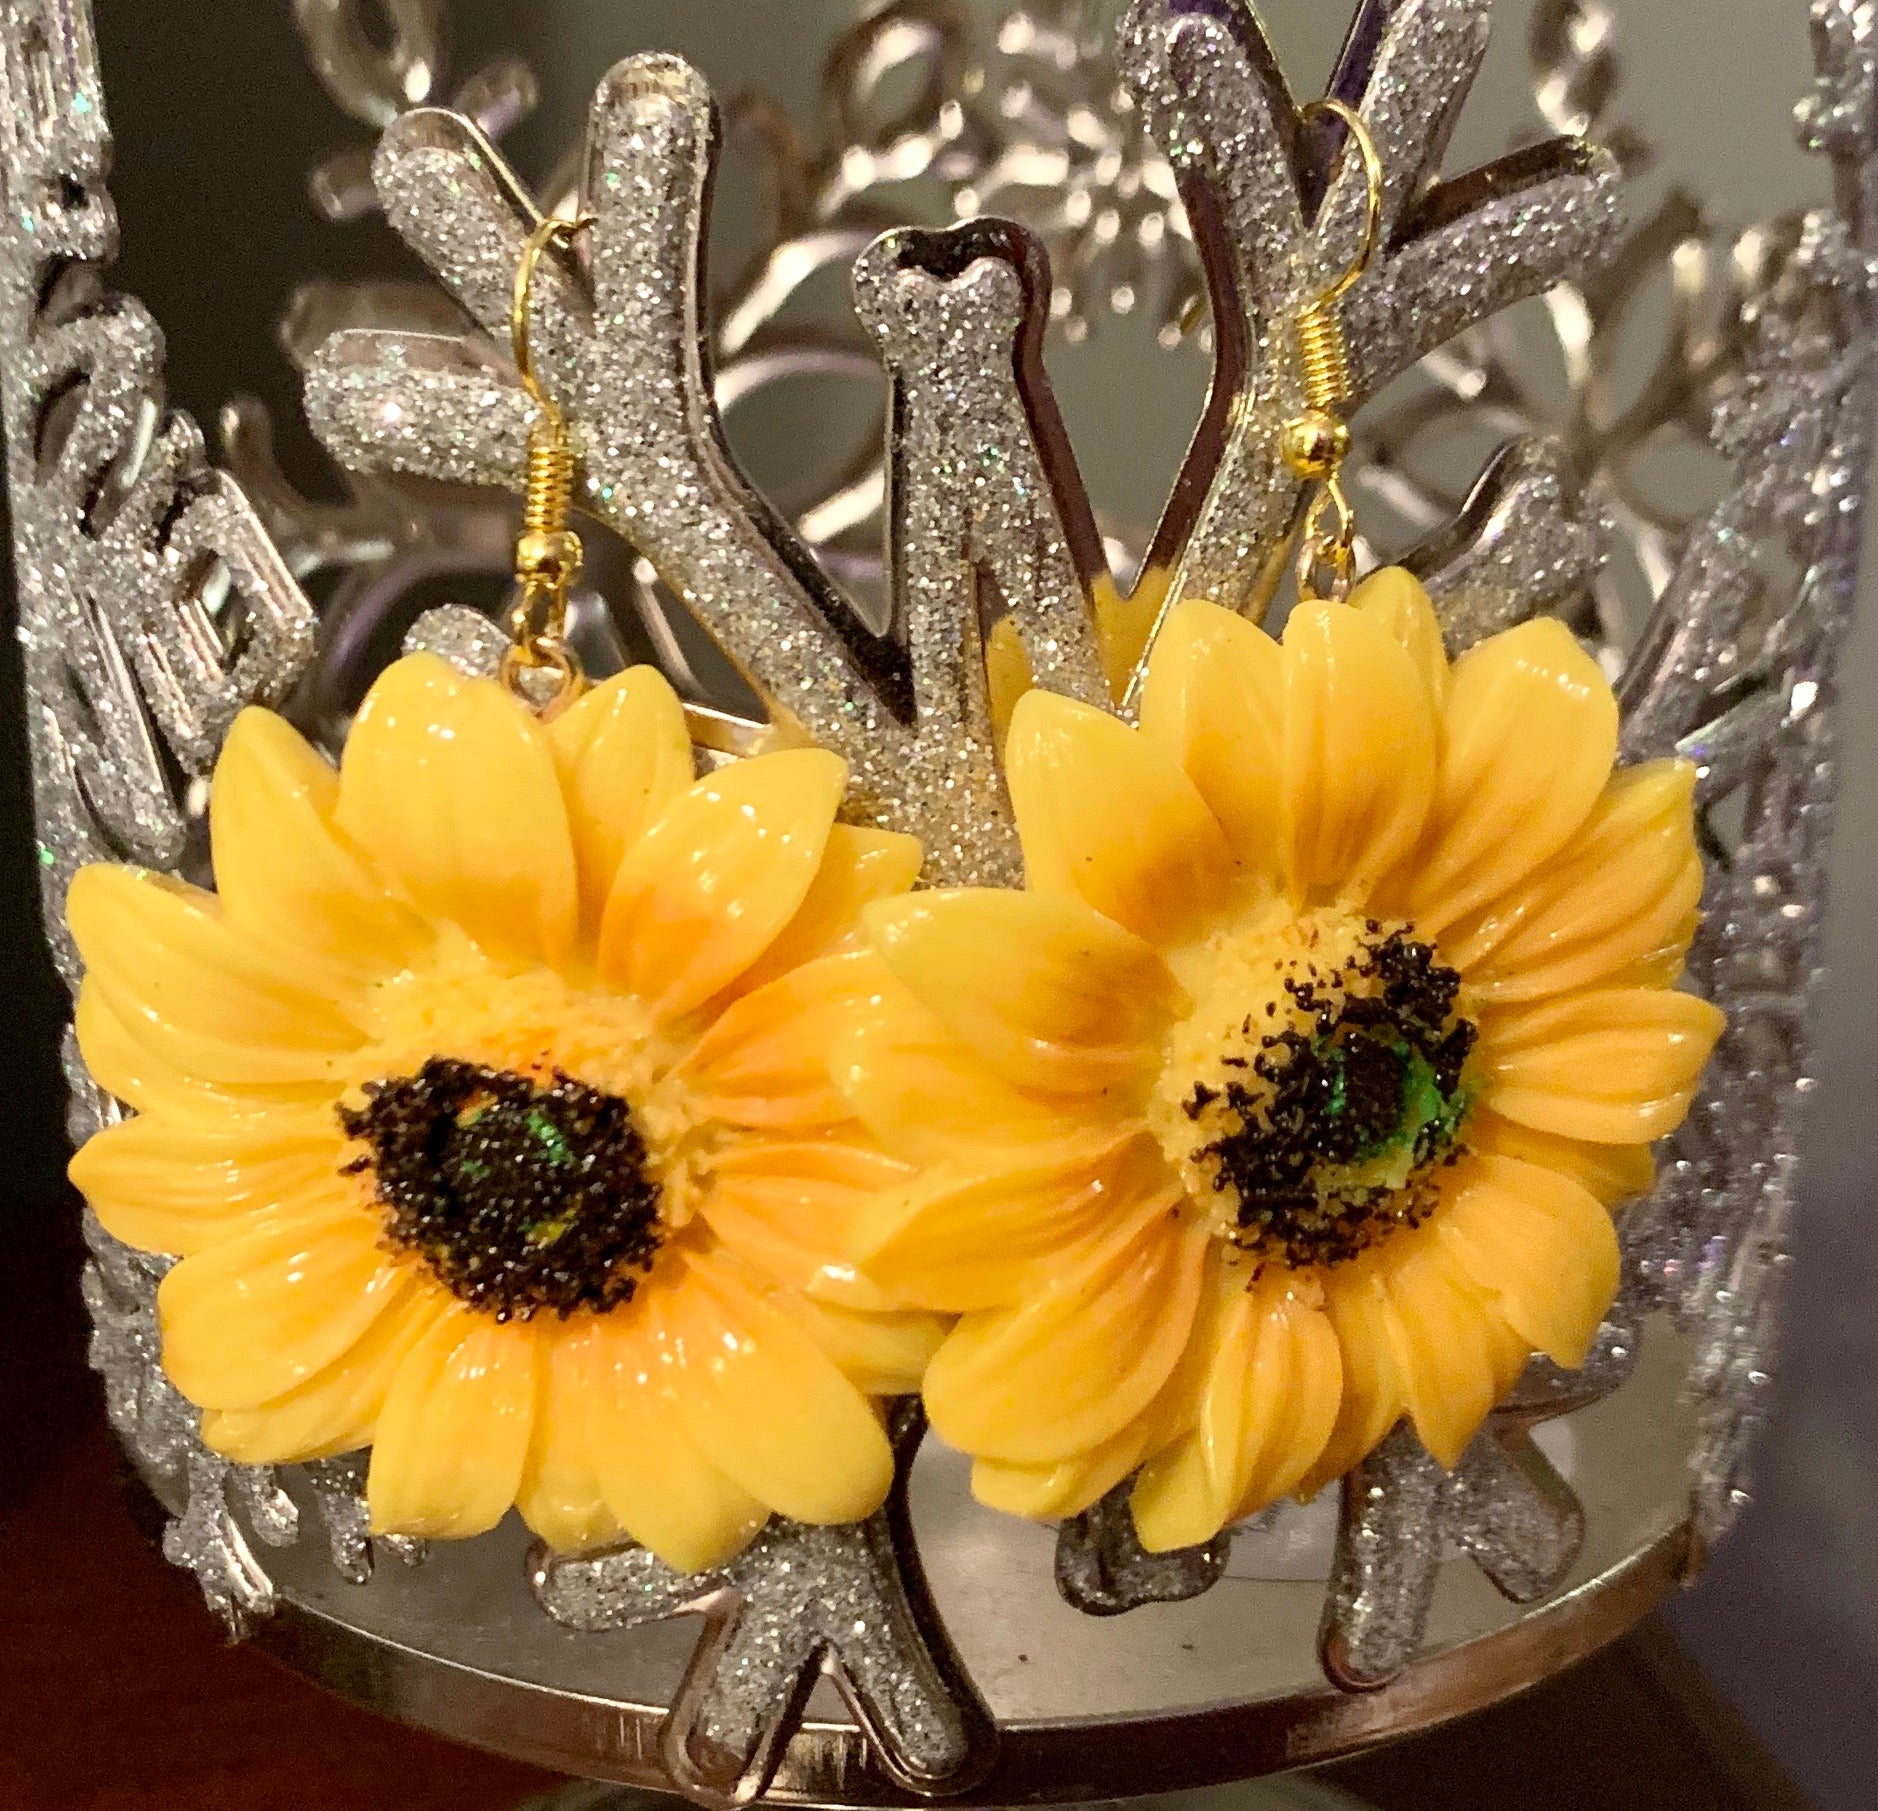 Sunflower Earrings - MixMatched Creations